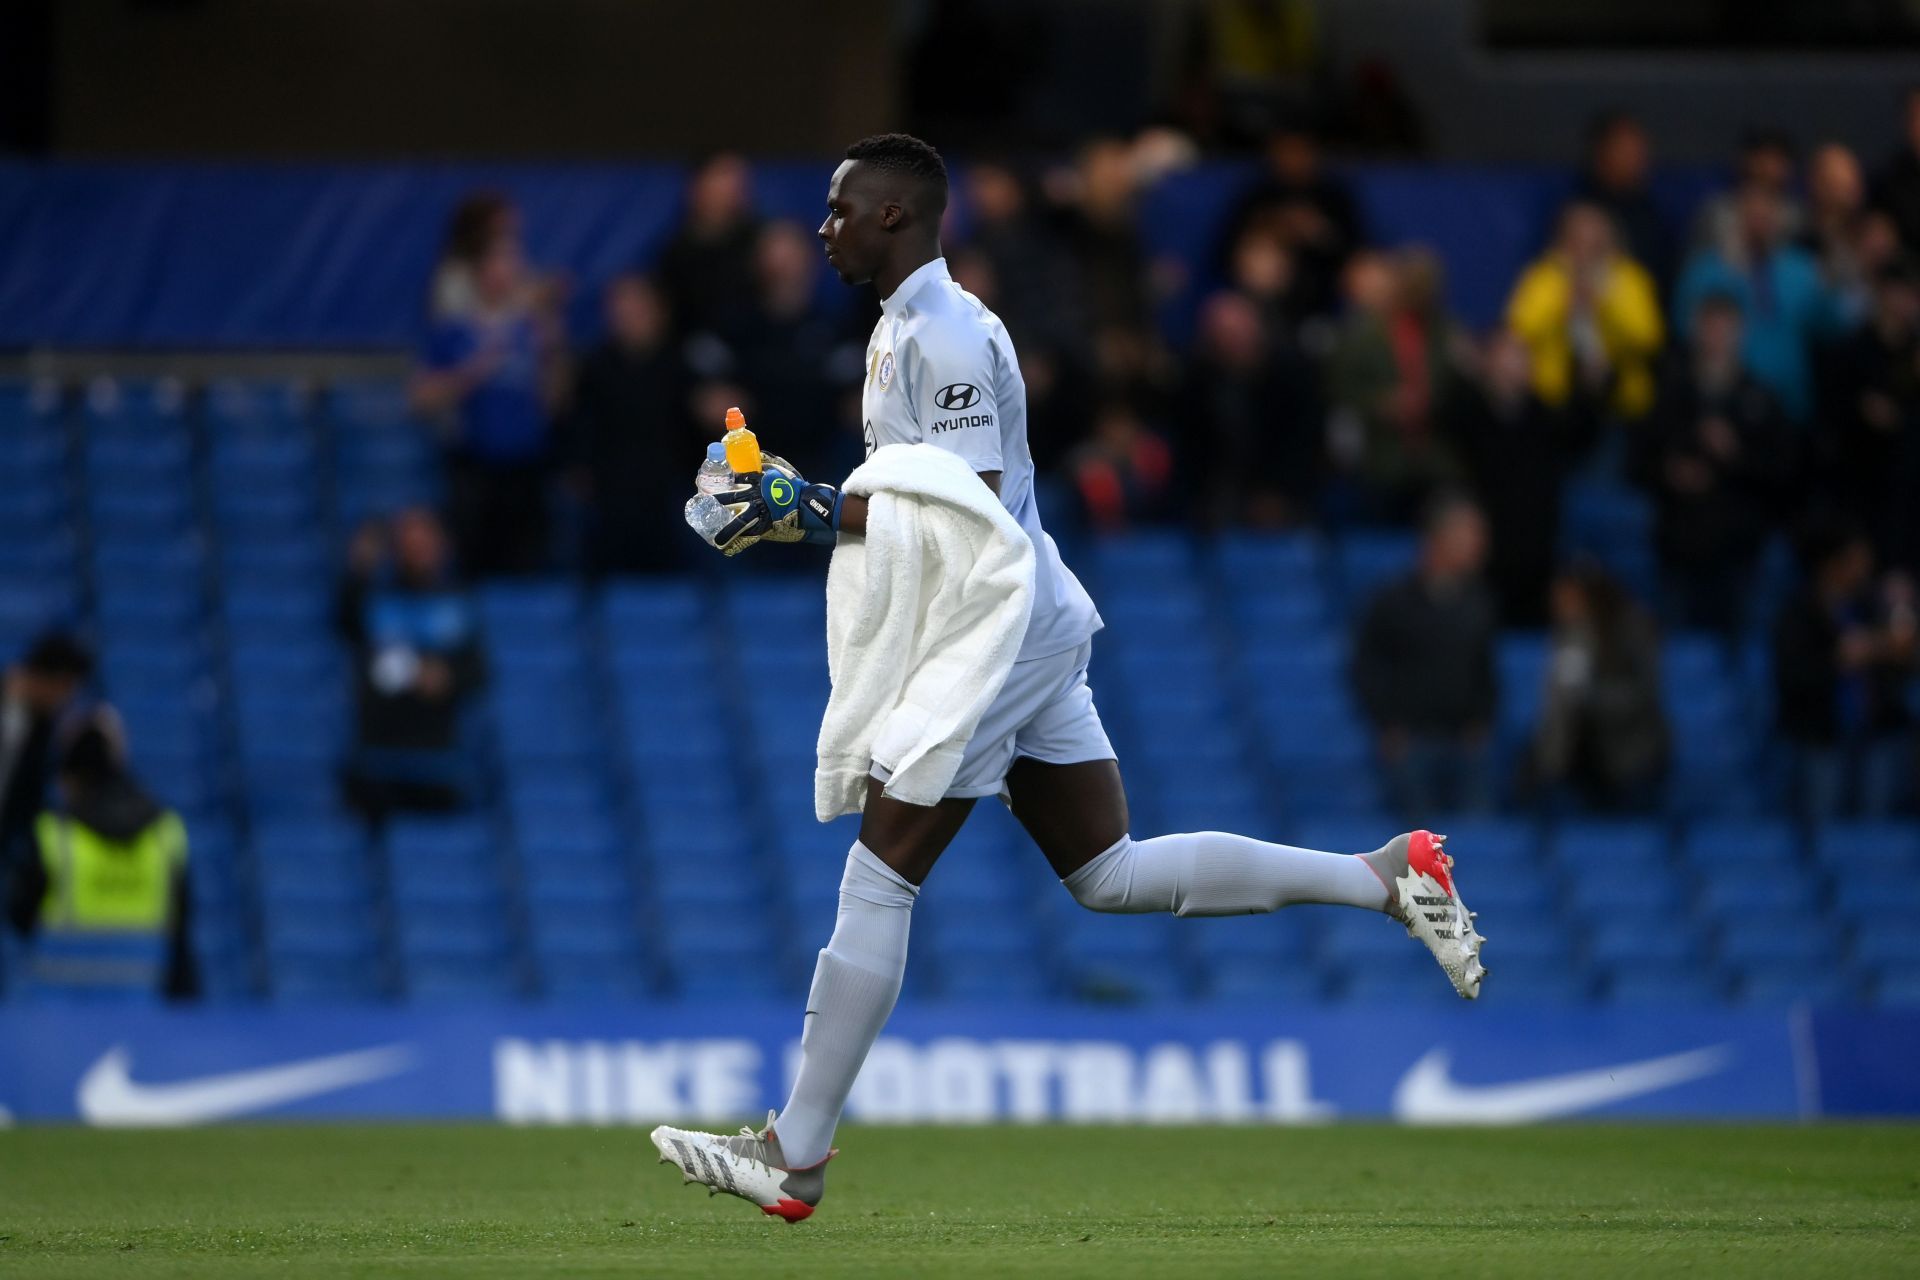 Mendy is one of the best shot stoppers in the Premier League